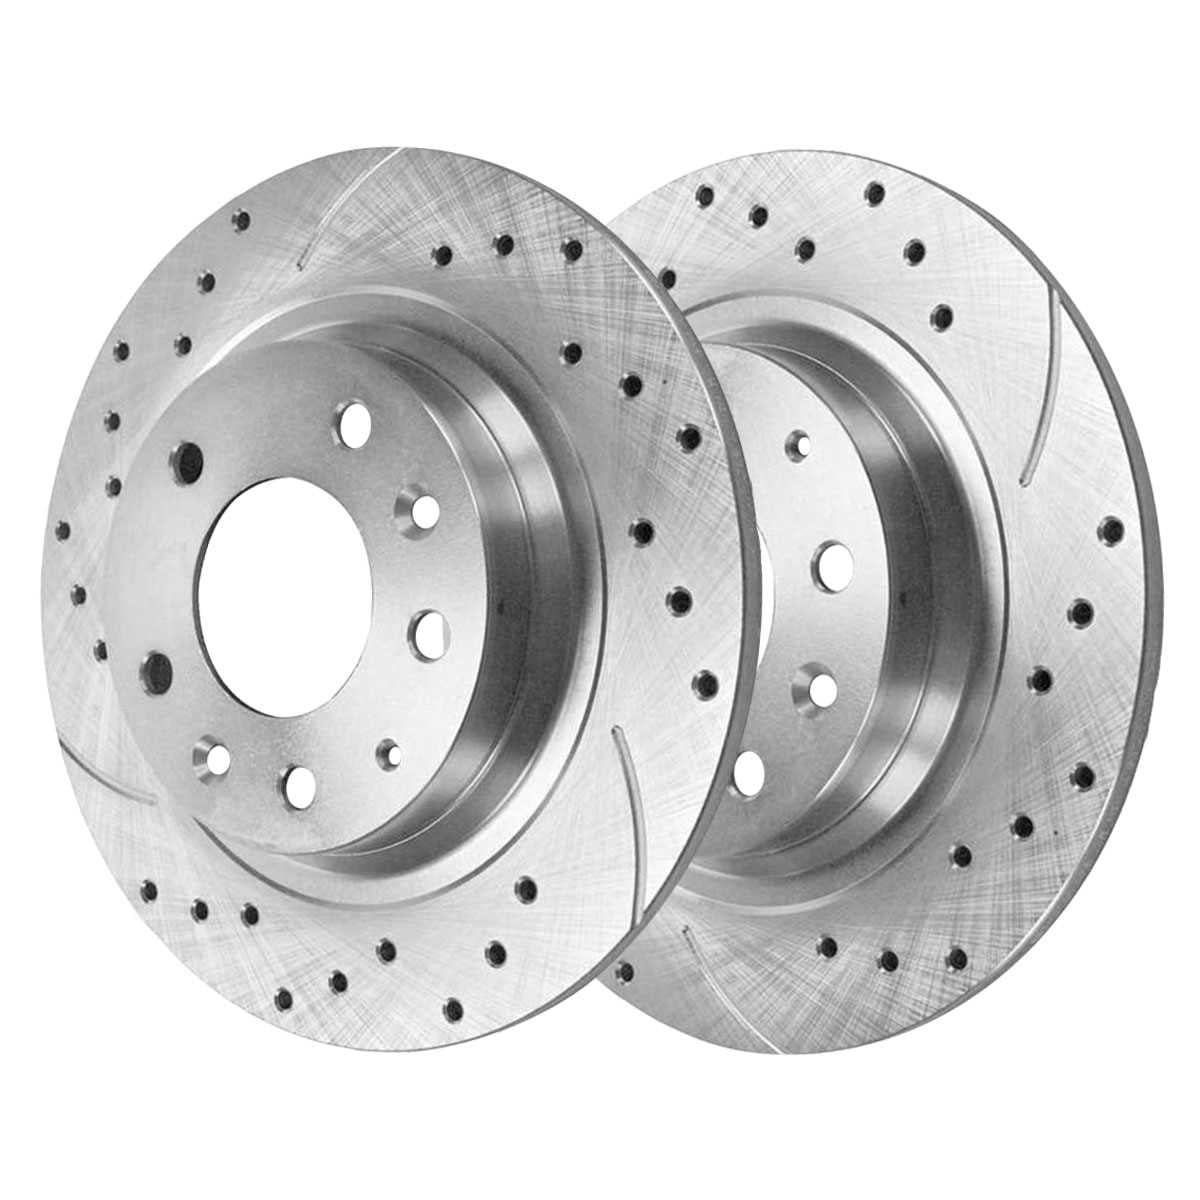 AutoShack Rear Drilled Slotted Brake Rotors Silver Pair of 2 Driver and  Passenger Side Replacement for Lincoln MKZ Zephyr Mercury Milan Mazda  Protege